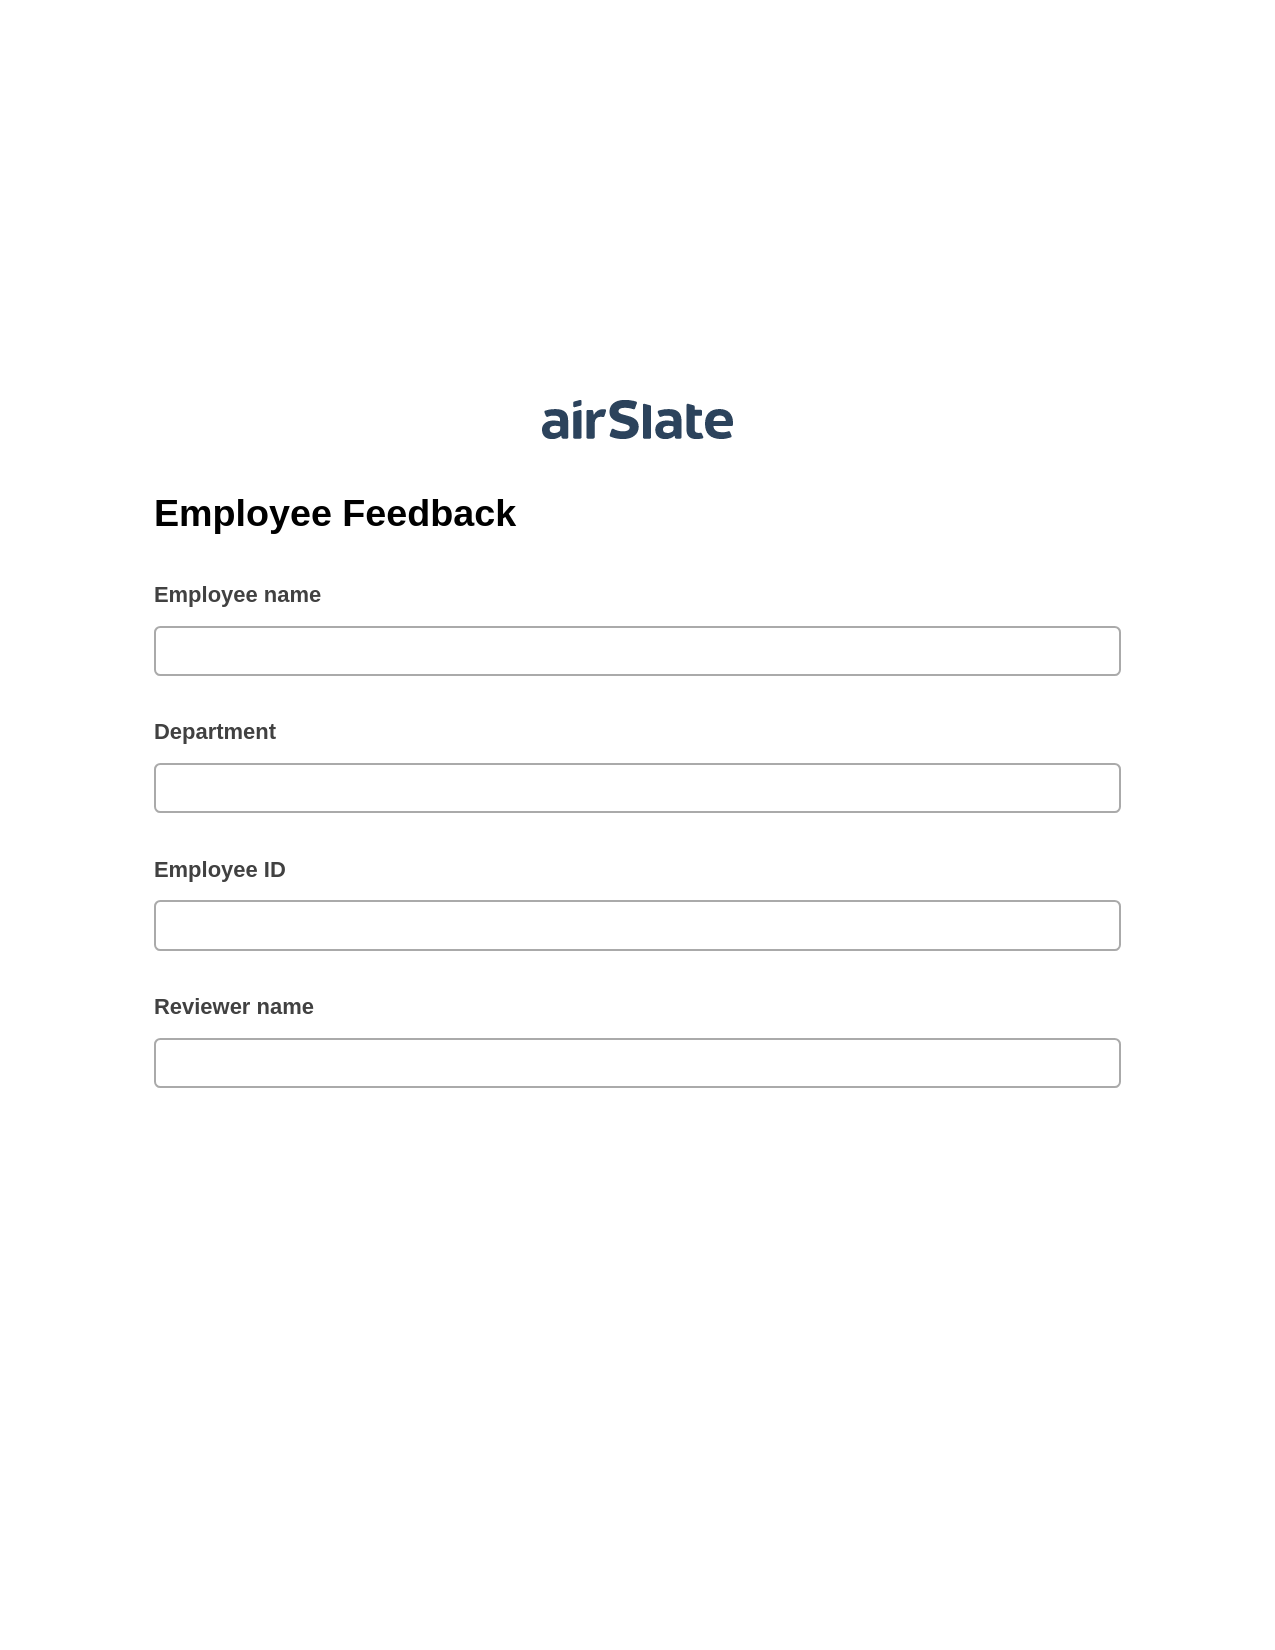 Employee Feedback Pre-fill from CSV File Bot, Remove Tags From Slate Bot, Post-finish Document Bot